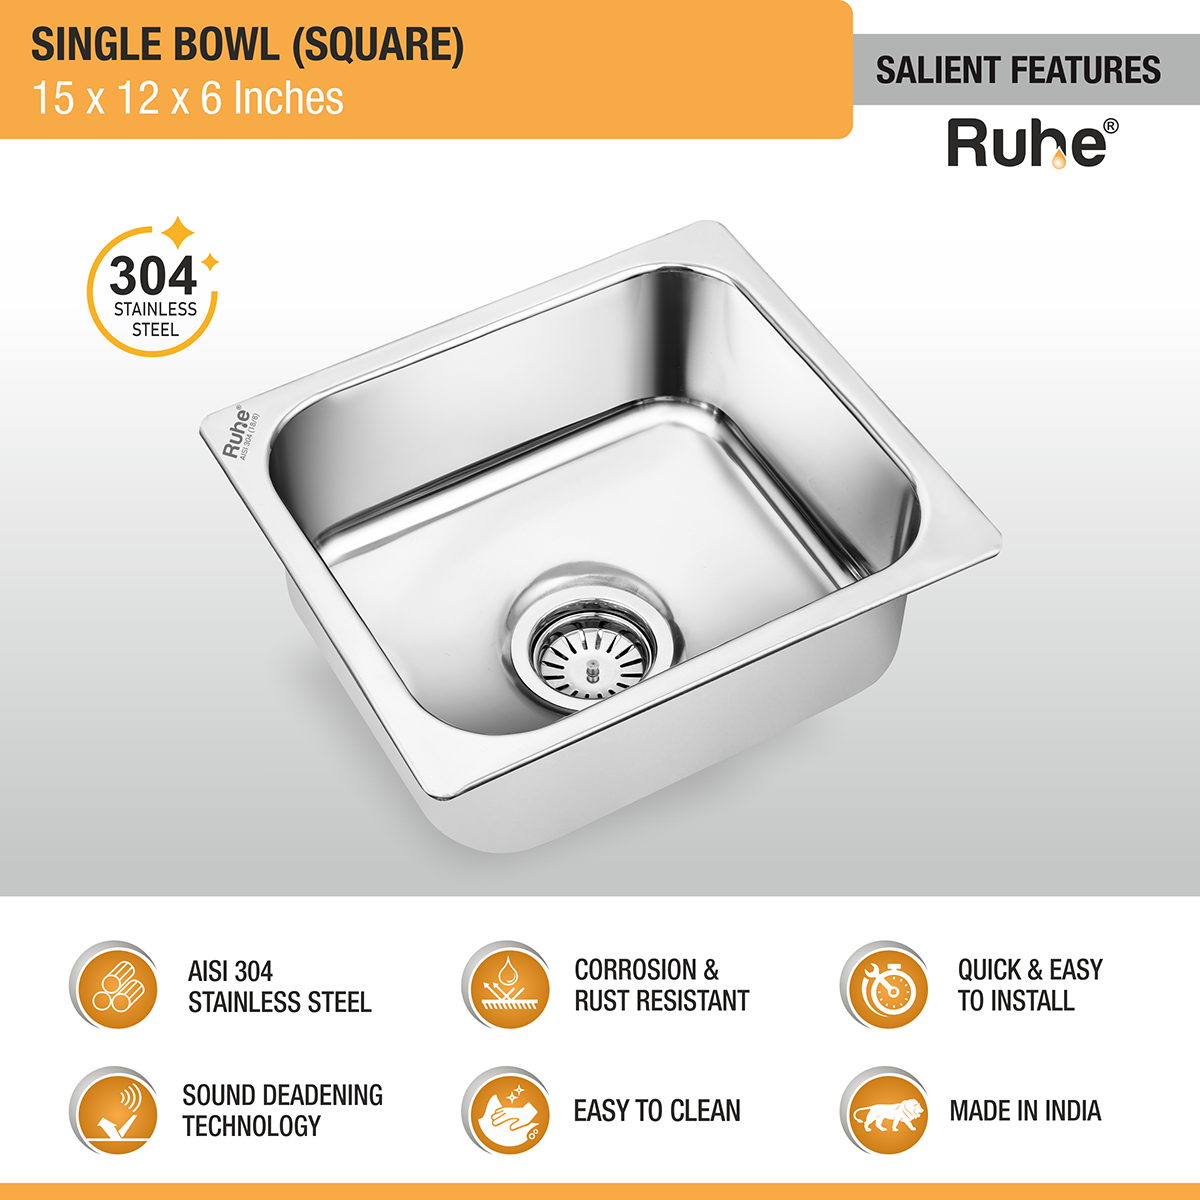 Square Single Bowl (15 x 12 x 6 inches) 304-Grade Kitchen Sink features and benefits